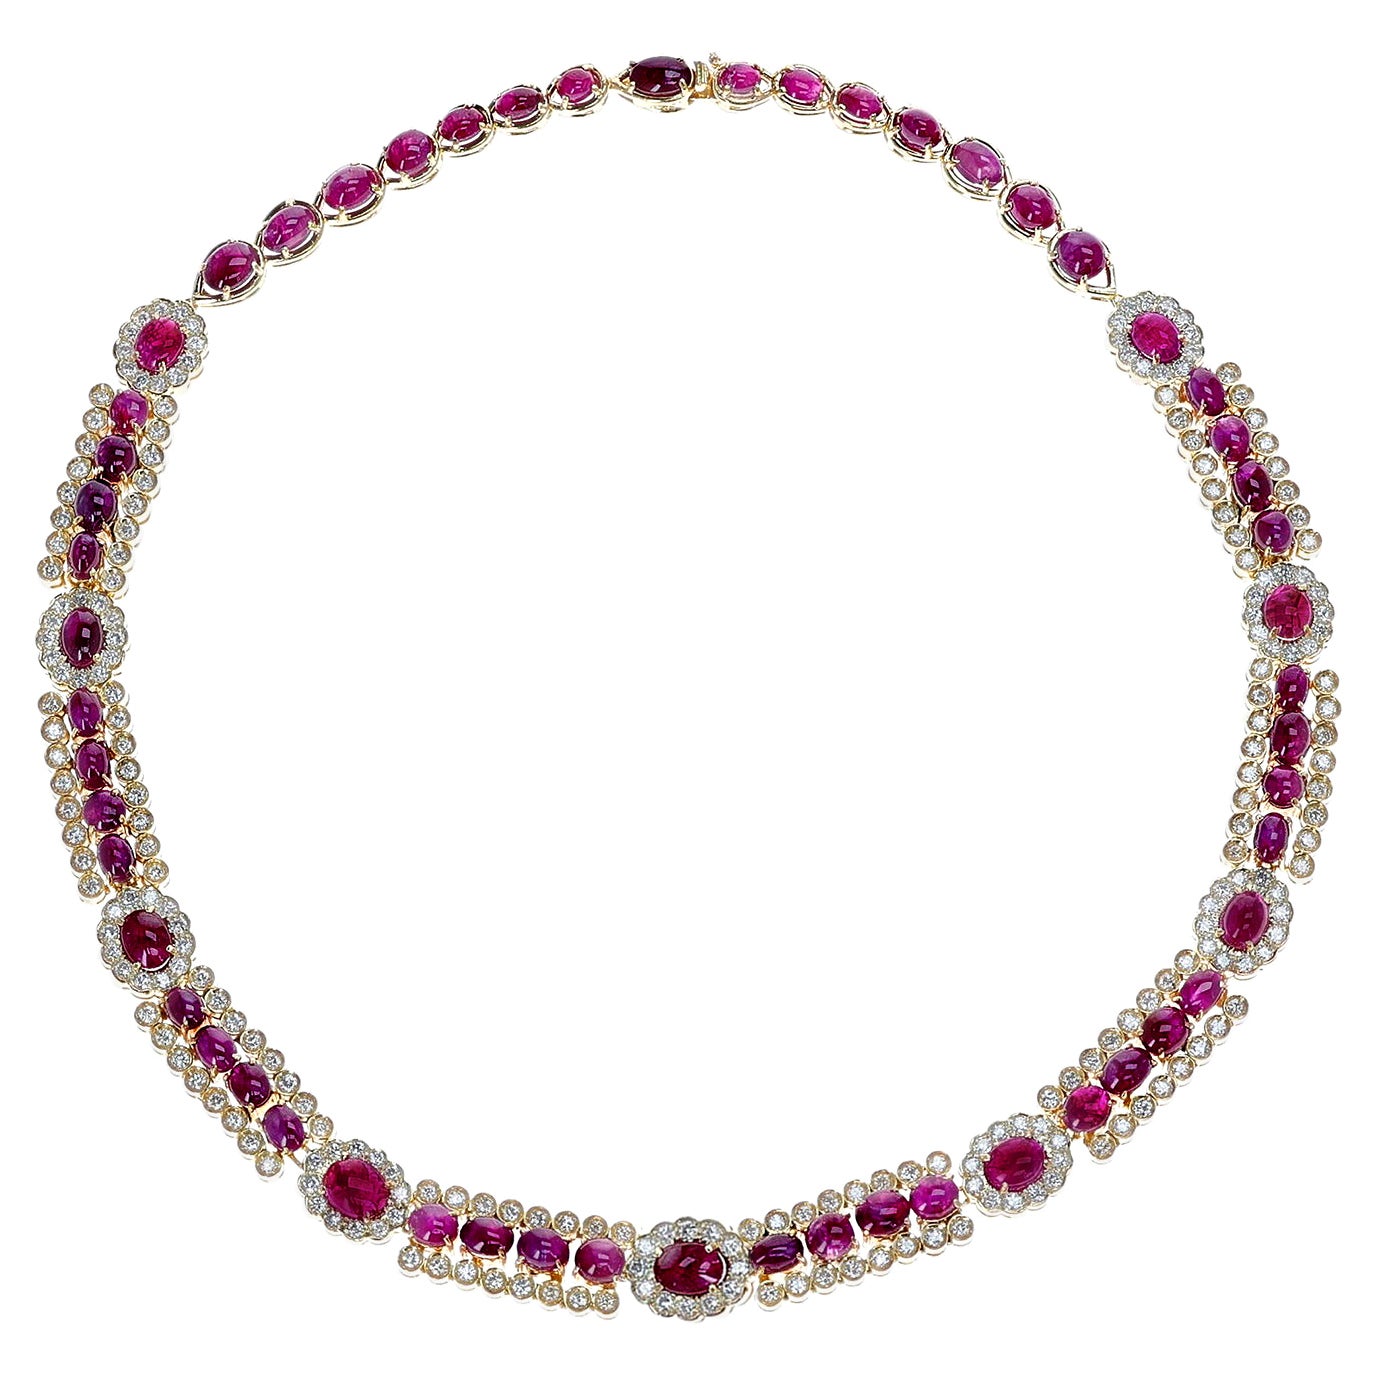 Unheated 56 Burma Star Ruby Cabochon and Diamond Necklace, Part of Set